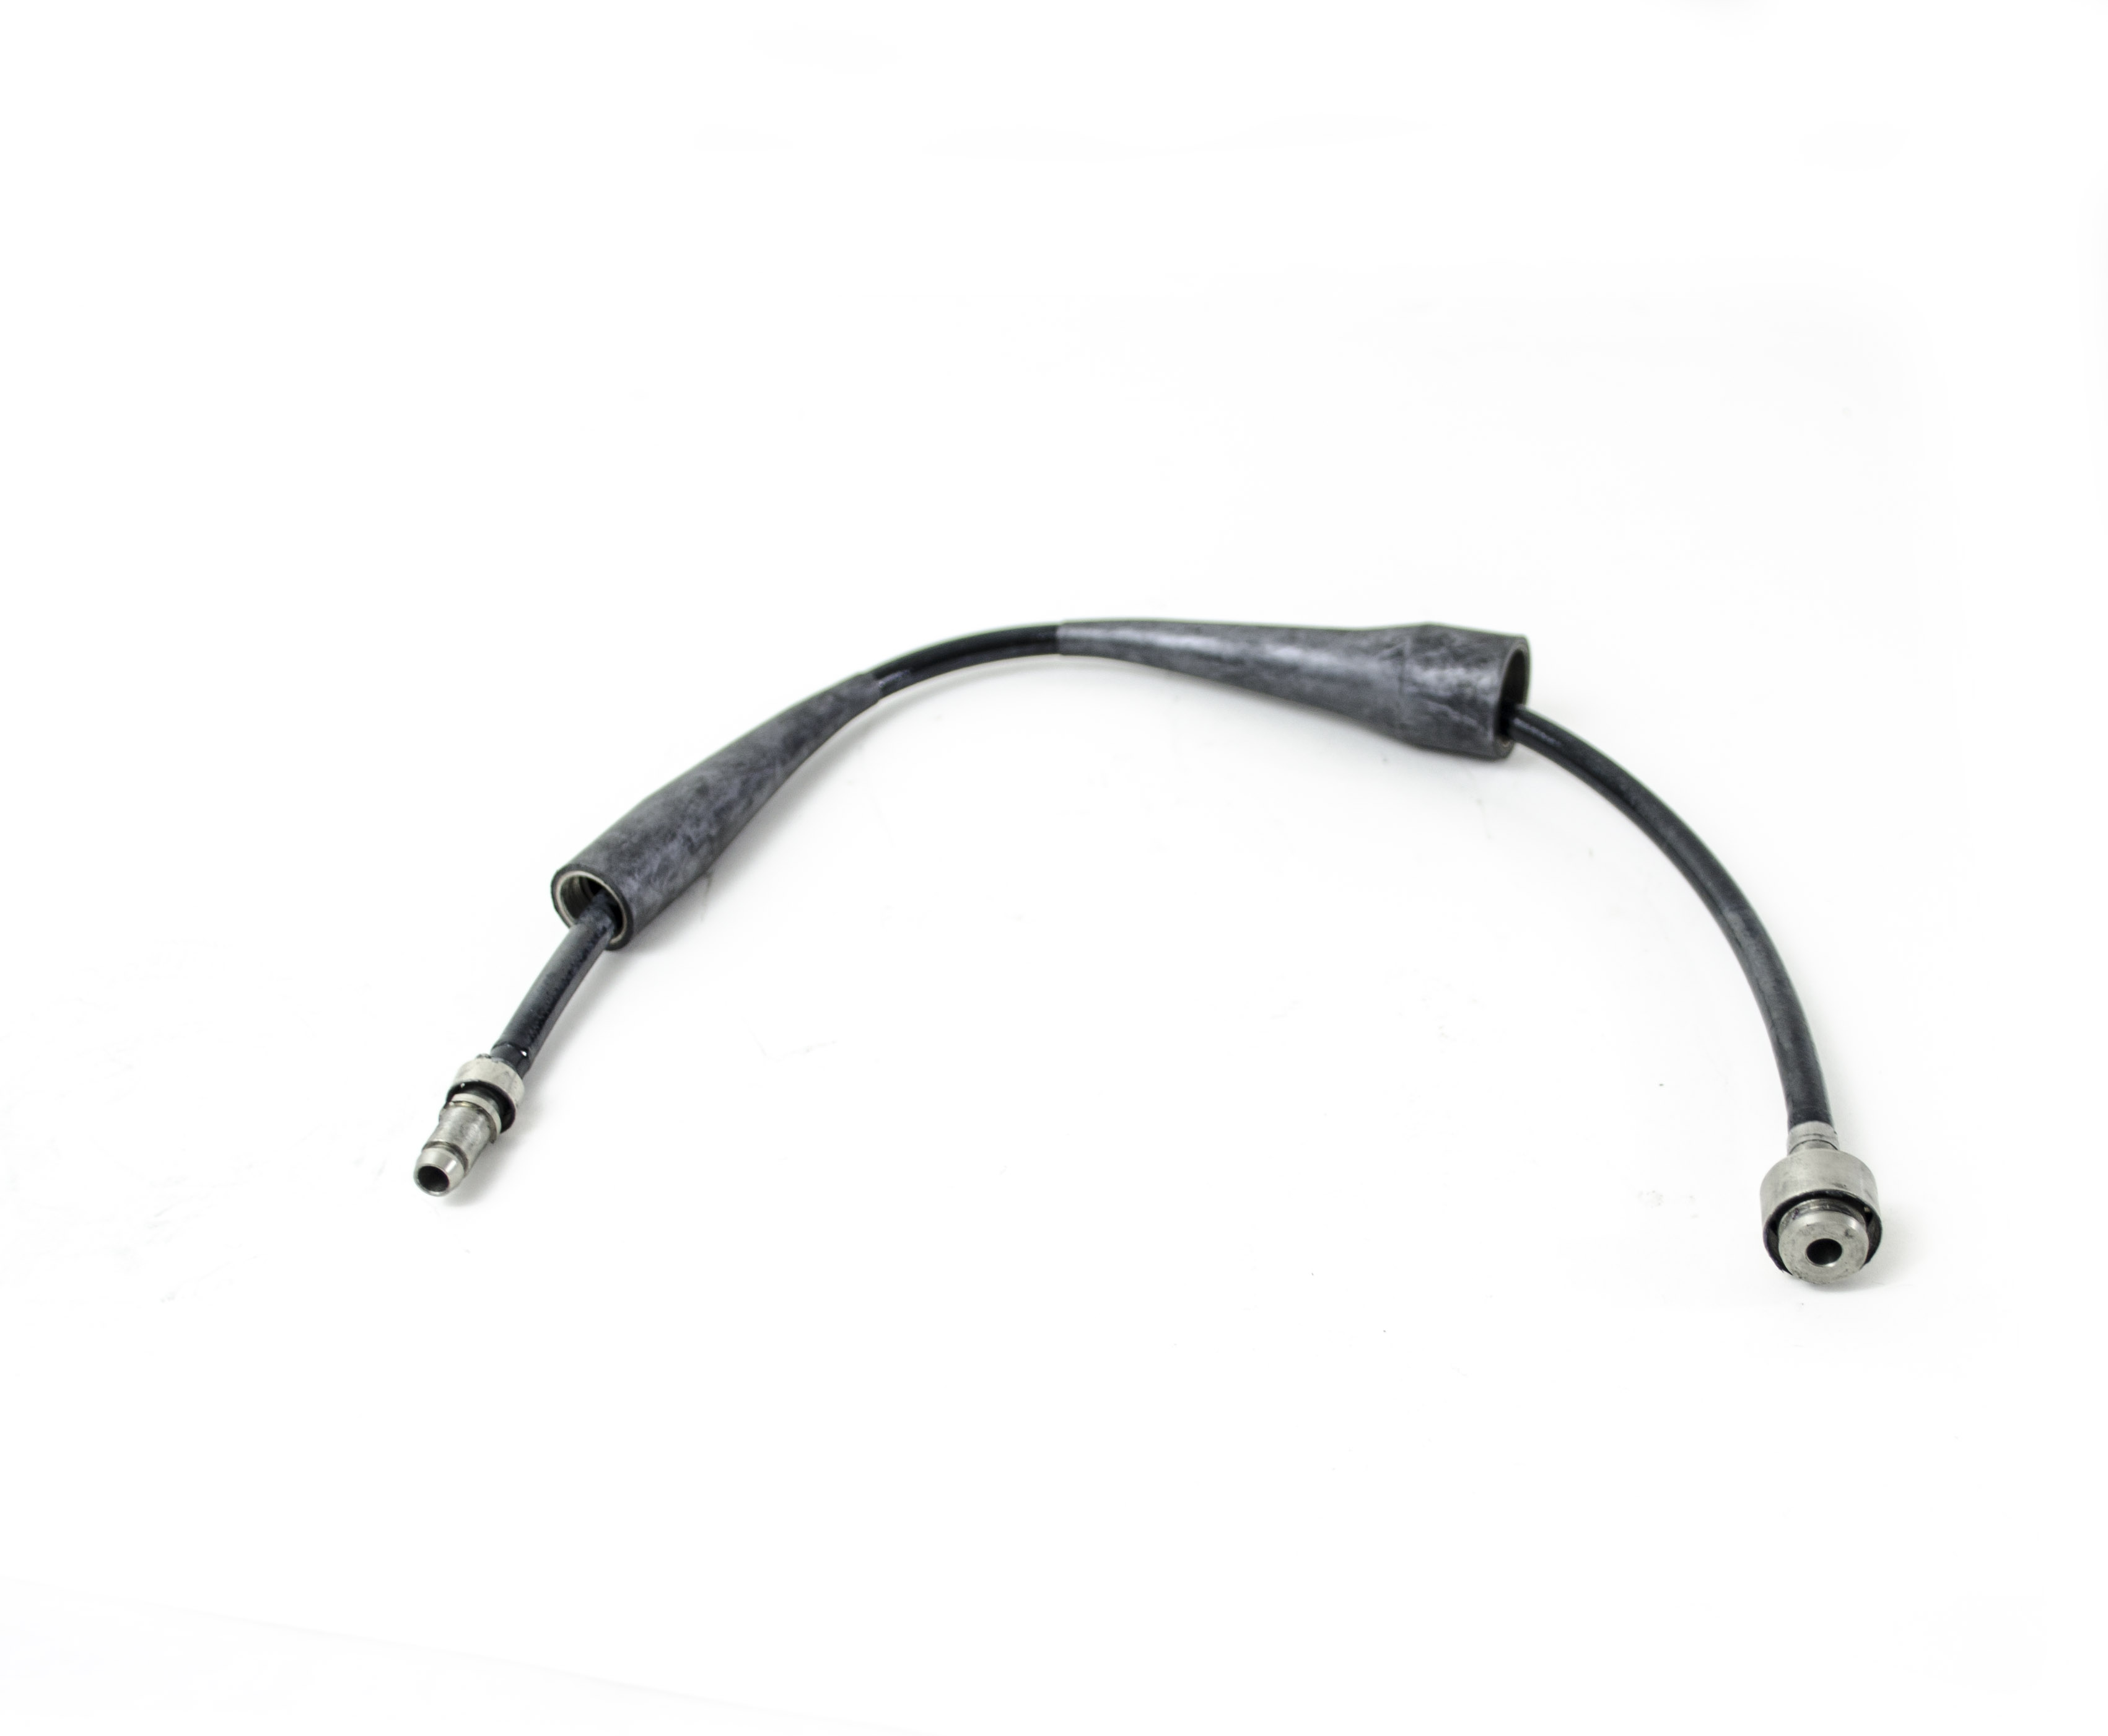 OEM Cable: Video Connector with Boots - URF-V, CYF-V2